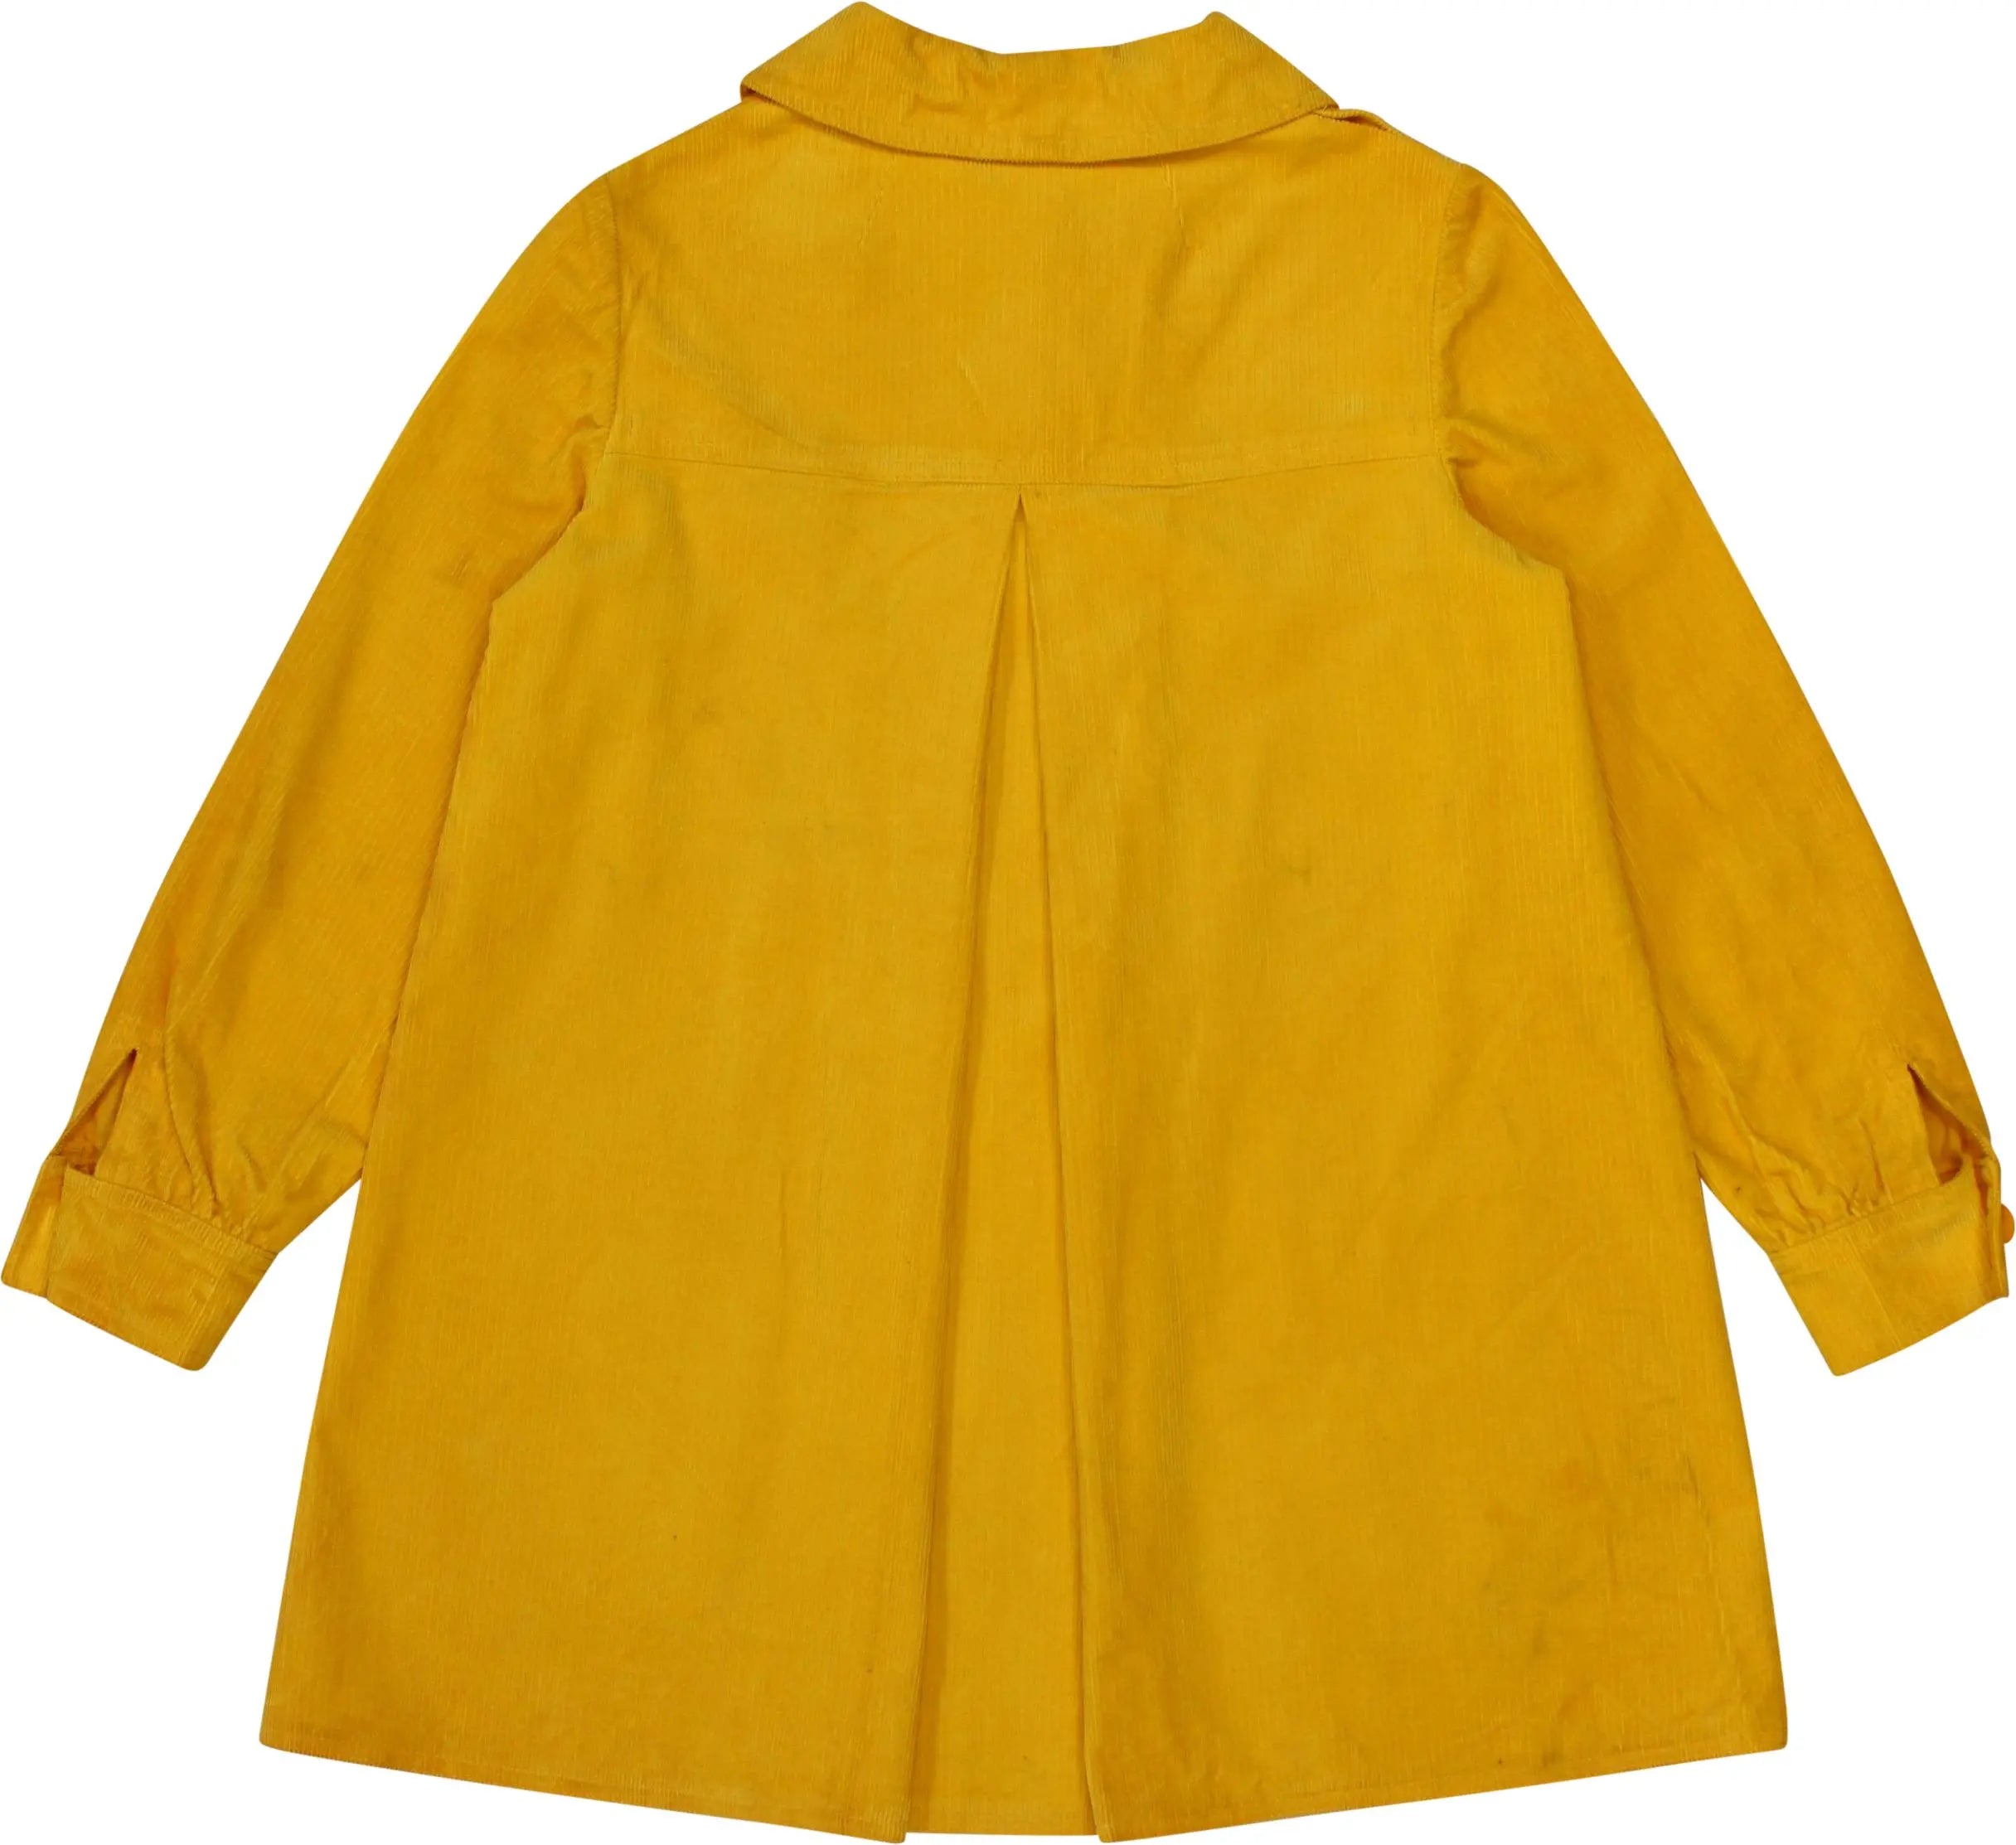 Unknown - Yellow Corduroy Jacket- ThriftTale.com - Vintage and second handclothing